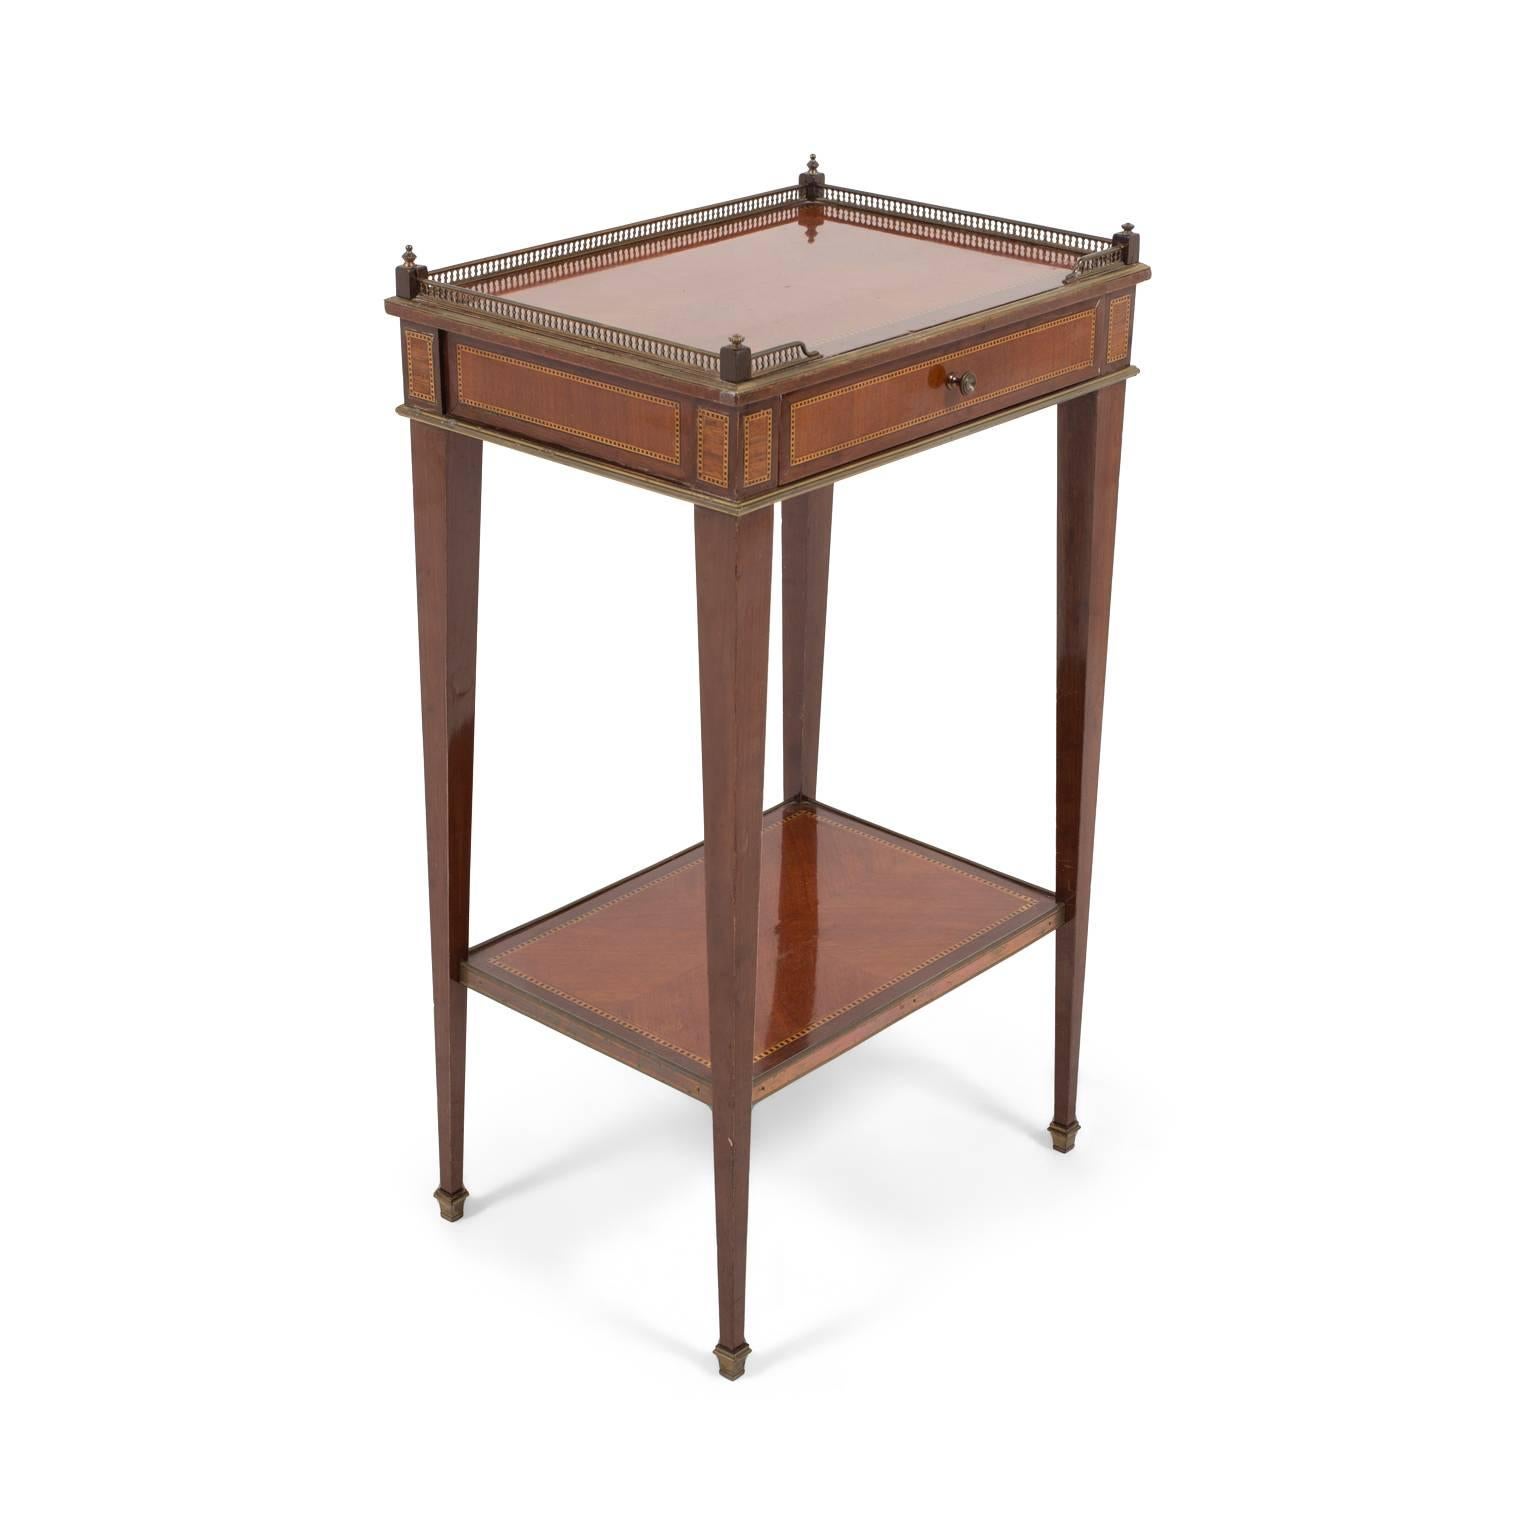 Beautiful quality on this master French ebonite small side table. Signed. Elegant and fine mounts with crisp detail in bronze.
Measures: 18 x 13 x 30.